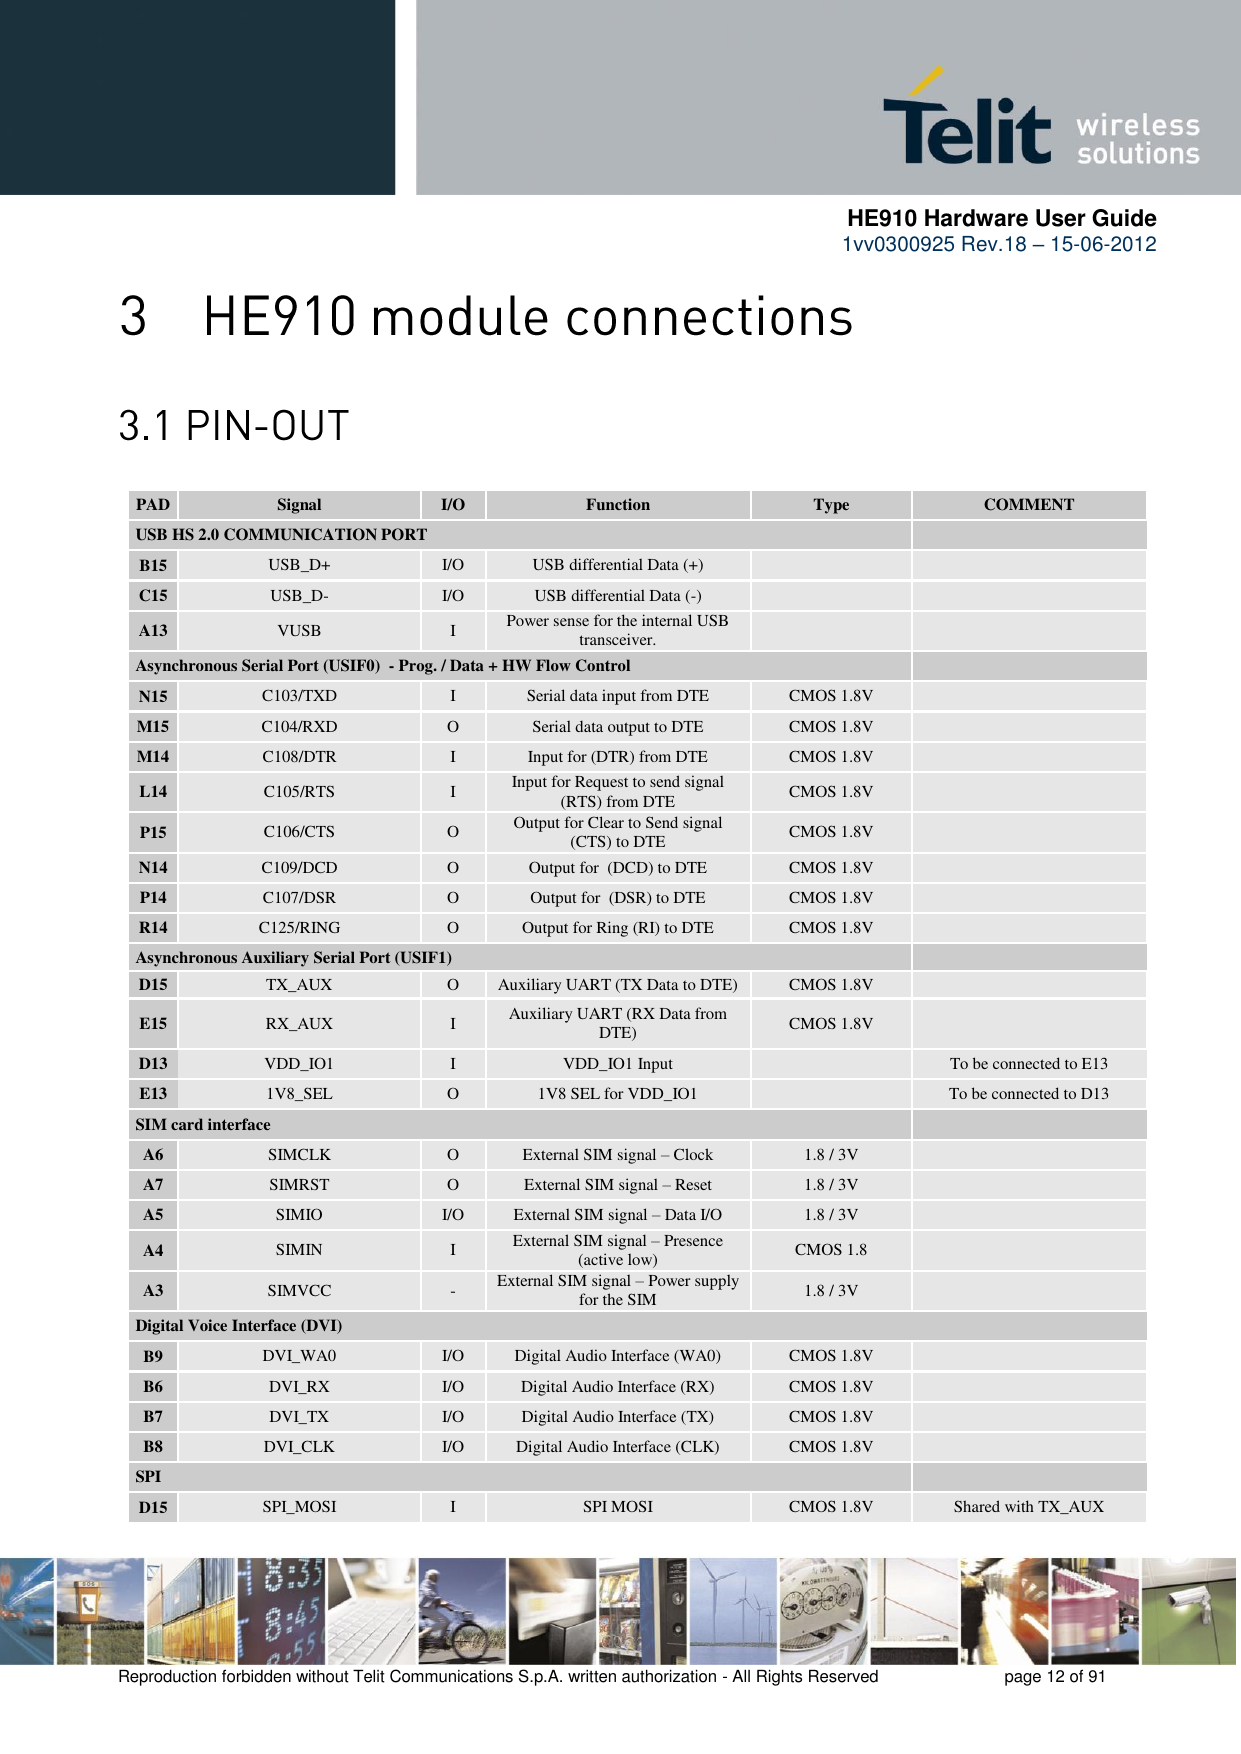      HE910 Hardware User Guide 1vv0300925 Rev.18 – 15-06-2012    Reproduction forbidden without Telit Communications S.p.A. written authorization - All Rights Reserved    page 12 of 91    PAD Signal I/O Function Type COMMENT USB HS 2.0 COMMUNICATION PORT    B15 USB_D+ I/O USB differential Data (+)   C15 USB_D- I/O USB differential Data (-)   A13 VUSB I Power sense for the internal USB transceiver.   Asynchronous Serial Port (USIF0)  - Prog. / Data + HW Flow Control   N15 C103/TXD I Serial data input from DTE CMOS 1.8V  M15 C104/RXD O Serial data output to DTE CMOS 1.8V  M14 C108/DTR I Input for (DTR) from DTE CMOS 1.8V  L14 C105/RTS I Input for Request to send signal (RTS) from DTE CMOS 1.8V  P15 C106/CTS O Output for Clear to Send signal (CTS) to DTE CMOS 1.8V  N14 C109/DCD O Output for  (DCD) to DTE CMOS 1.8V  P14 C107/DSR O Output for  (DSR) to DTE CMOS 1.8V  R14 C125/RING O Output for Ring (RI) to DTE CMOS 1.8V  Asynchronous Auxiliary Serial Port (USIF1)    D15 TX_AUX O Auxiliary UART (TX Data to DTE) CMOS 1.8V  E15 RX_AUX I Auxiliary UART (RX Data from DTE) CMOS 1.8V  D13 VDD_IO1 I VDD_IO1 Input  To be connected to E13 E13 1V8_SEL O 1V8 SEL for VDD_IO1  To be connected to D13 SIM card interface     A6 SIMCLK O External SIM signal – Clock 1.8 / 3V  A7 SIMRST O External SIM signal – Reset 1.8 / 3V  A5 SIMIO I/O External SIM signal – Data I/O 1.8 / 3V  A4 SIMIN I External SIM signal – Presence (active low) CMOS 1.8  A3 SIMVCC - External SIM signal – Power supply for the SIM 1.8 / 3V  Digital Voice Interface (DVI)  B9 DVI_WA0 I/O Digital Audio Interface (WA0) CMOS 1.8V  B6 DVI_RX I/O Digital Audio Interface (RX) CMOS 1.8V  B7 DVI_TX I/O Digital Audio Interface (TX) CMOS 1.8V  B8 DVI_CLK I/O Digital Audio Interface (CLK) CMOS 1.8V  SPI      D15 SPI_MOSI I SPI MOSI CMOS 1.8V Shared with TX_AUX 